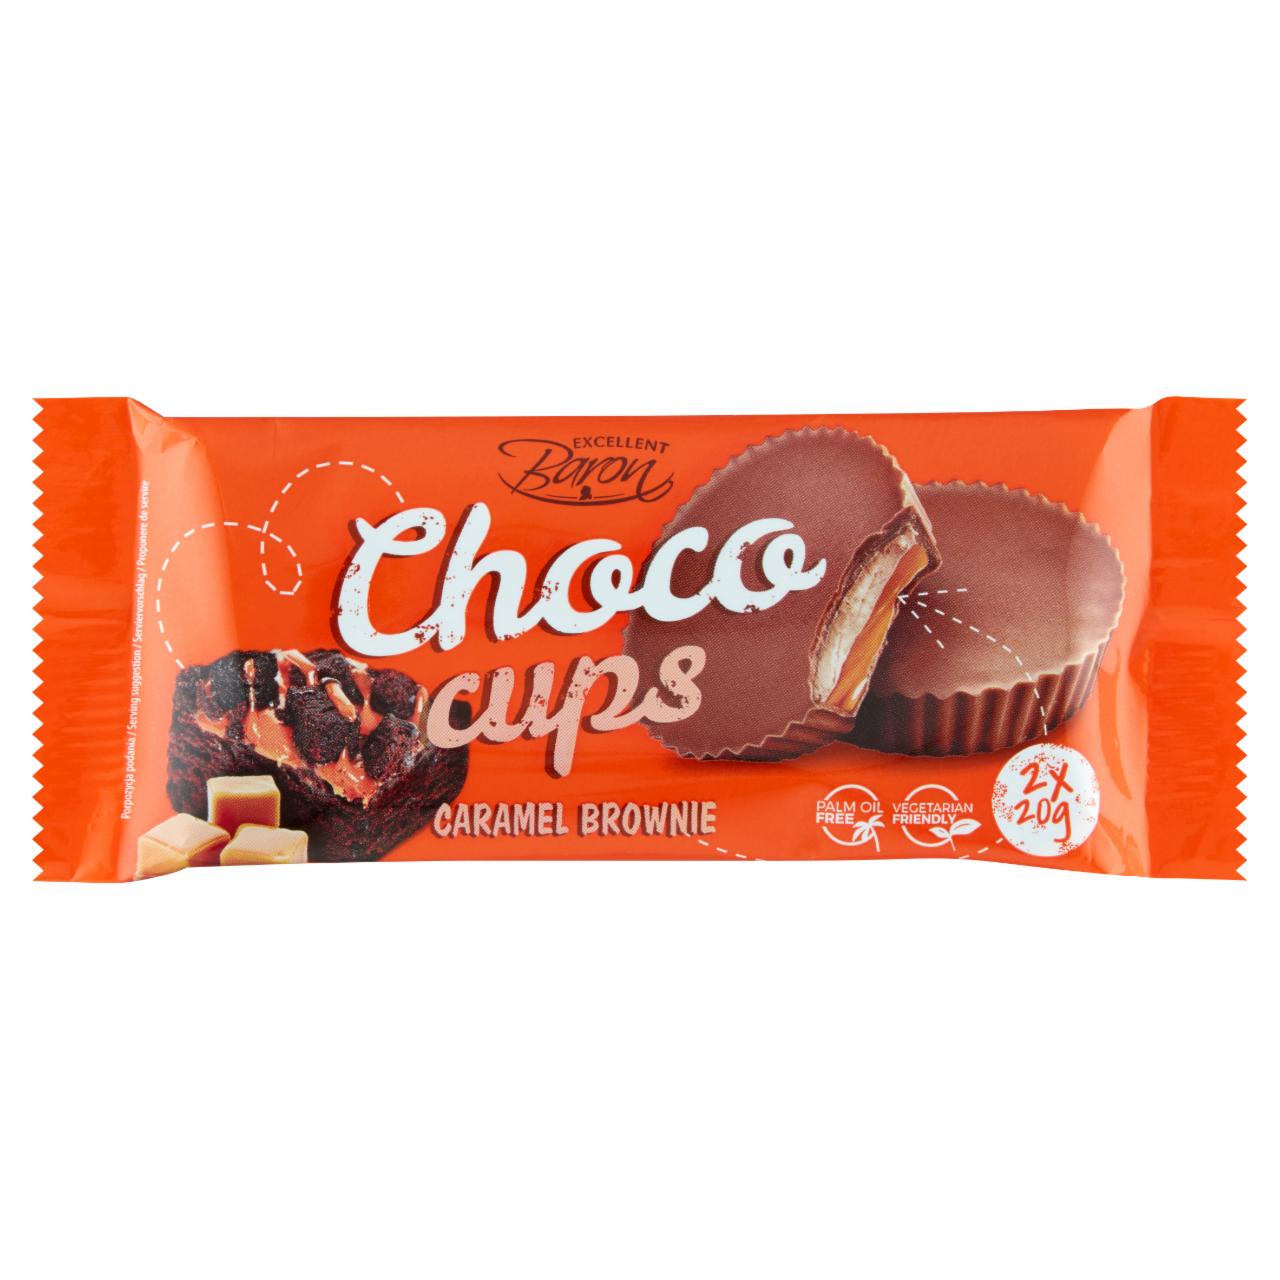 Photo - Excellent Baron Choco Cups Caramel Brownie Chocolate 40 g (2 x 20 g)